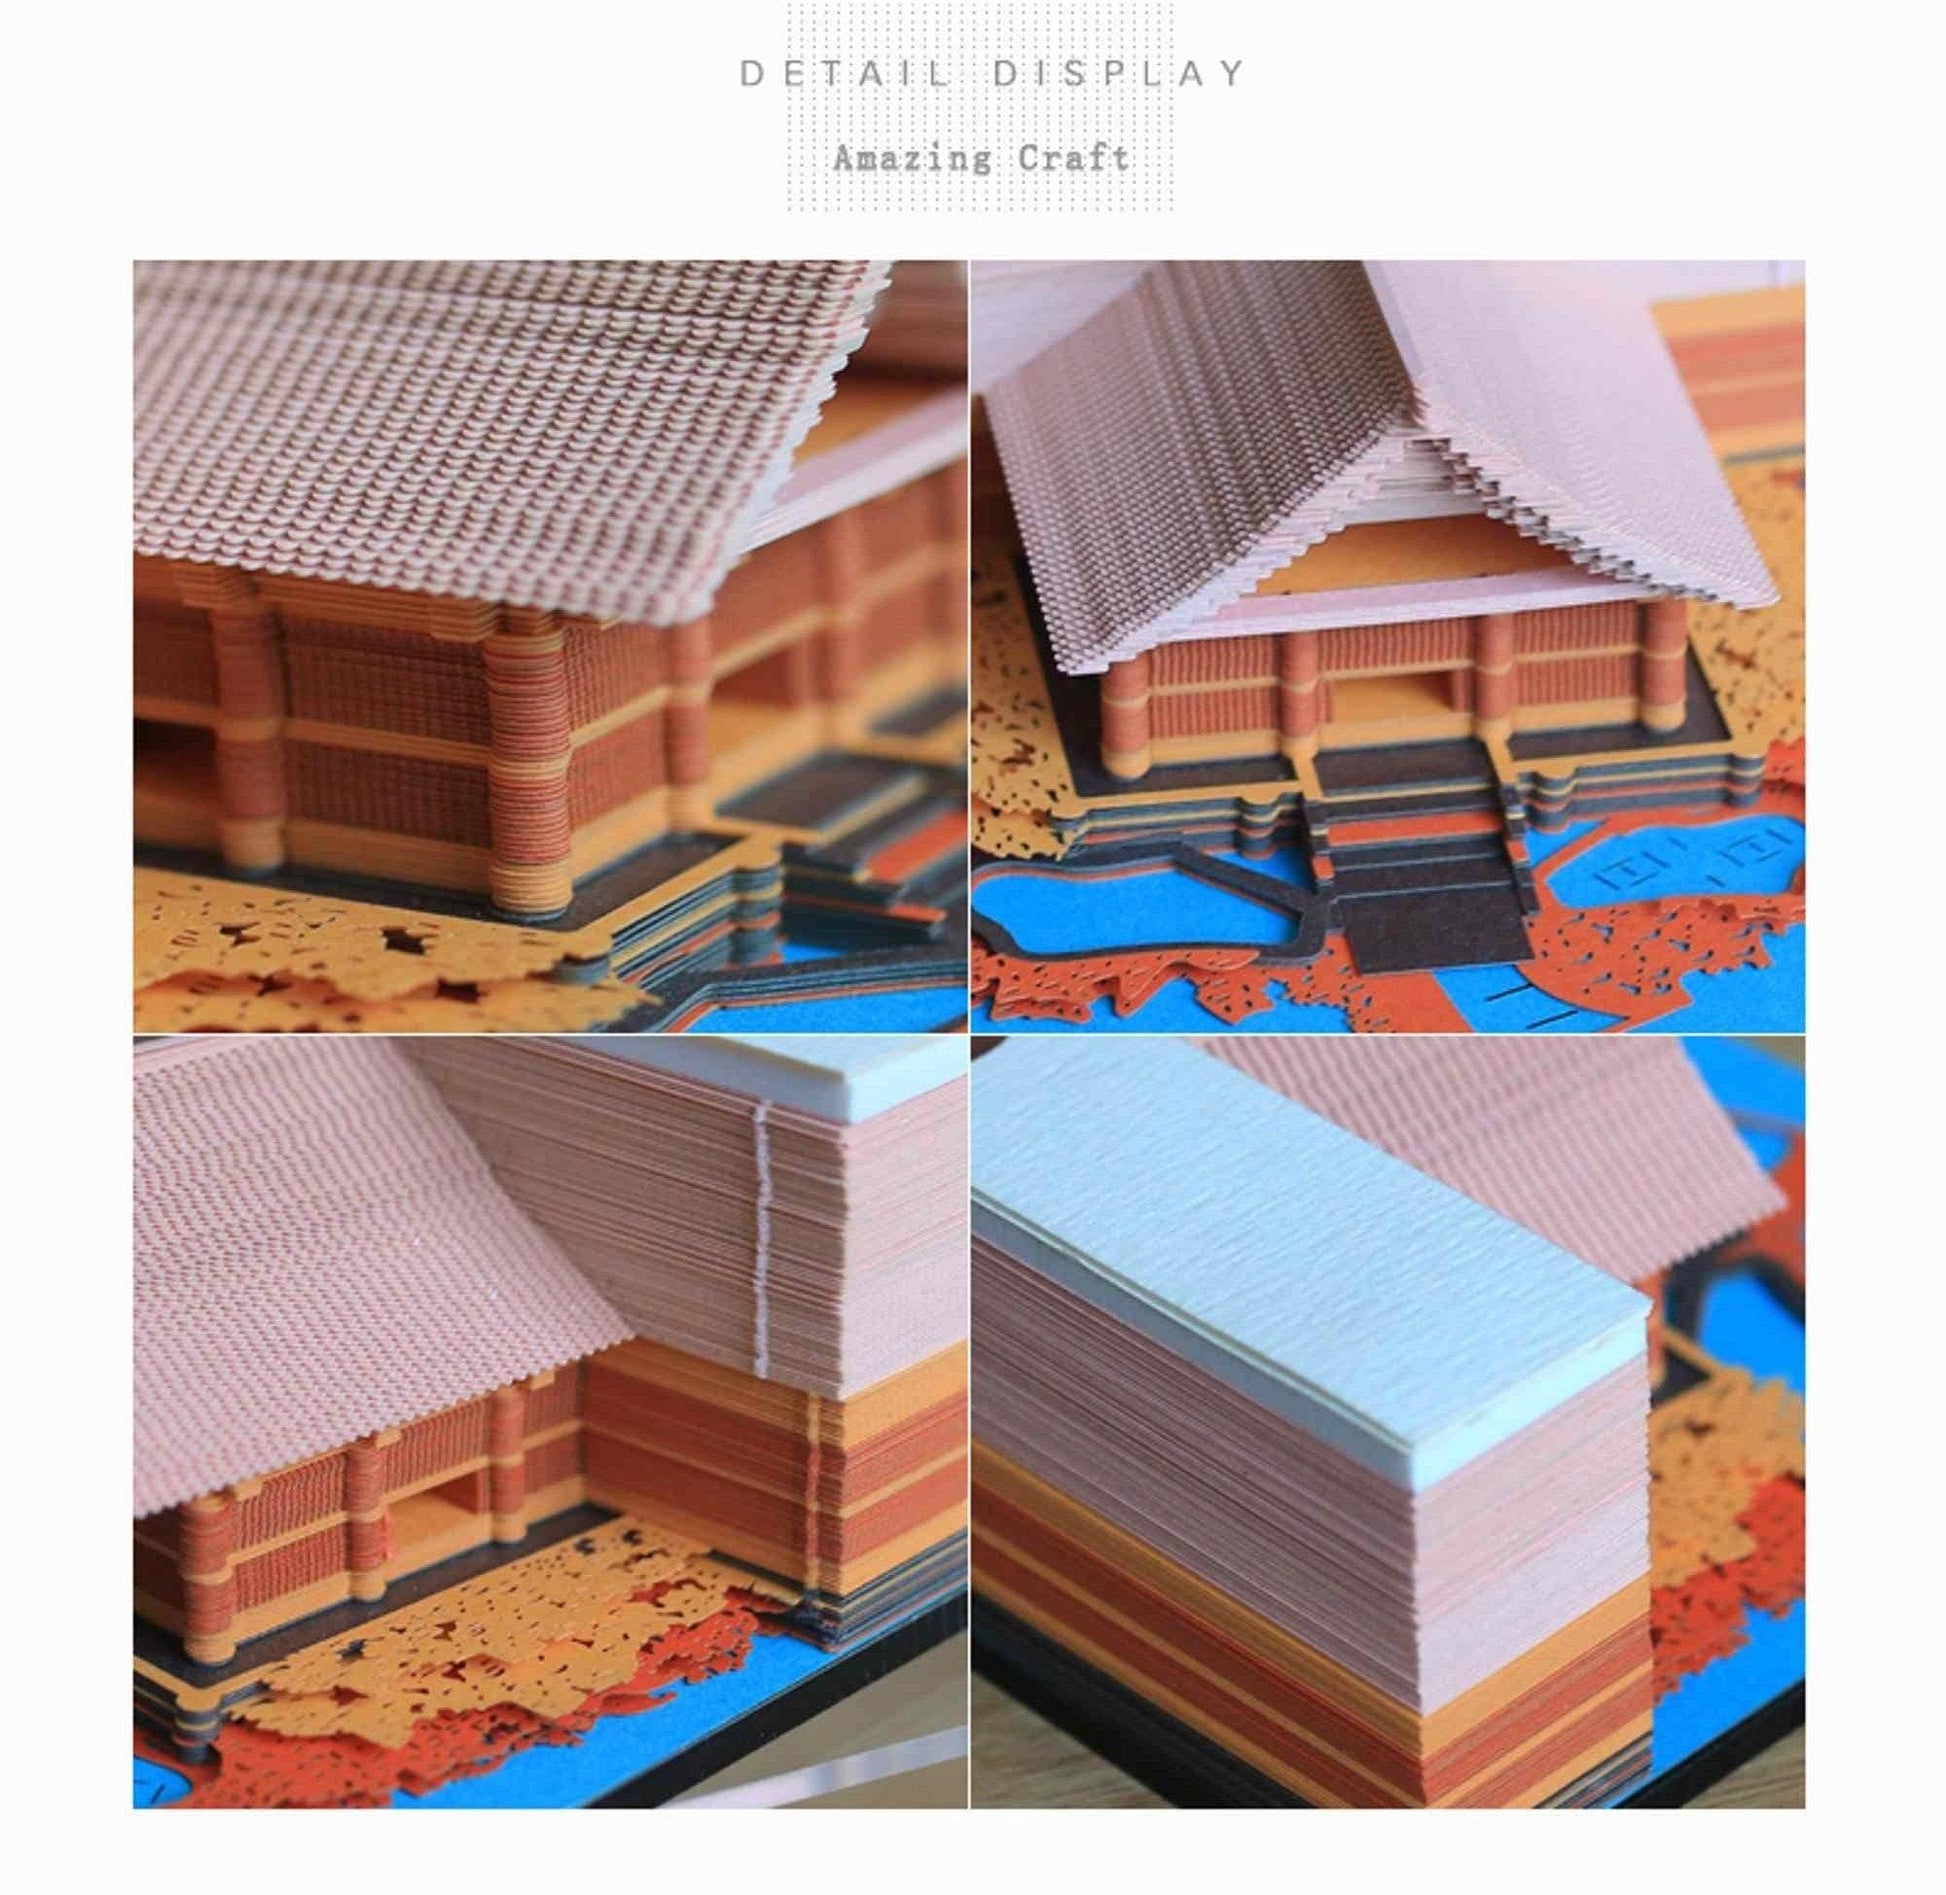 Dreamy Cottage Miniature 3D Note Pad - Creative Memo Pad - 3D Omoshiroi Block - DIY Paper Craft - Stationery Toys With LED - Gifts - Rajbharti Crafts